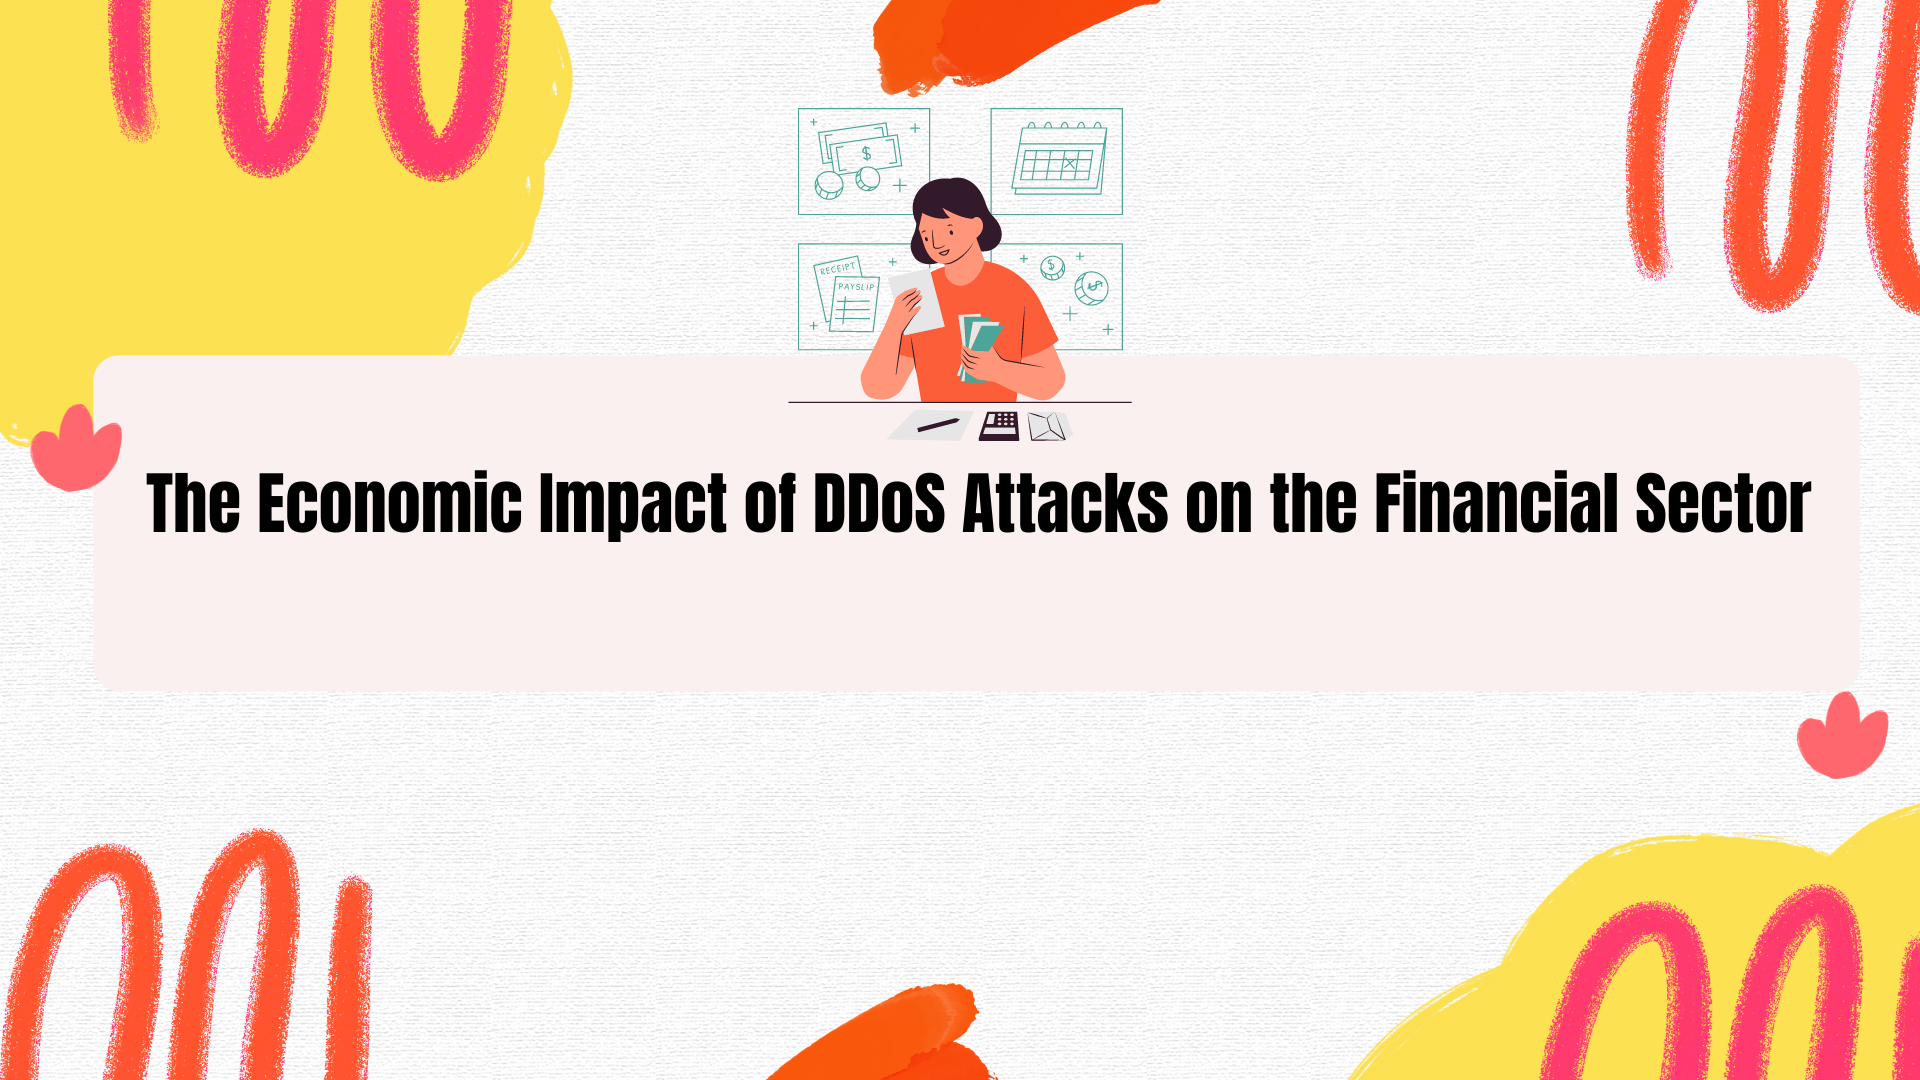 The Economic Impact of DDoS Attacks on the Financial Sector